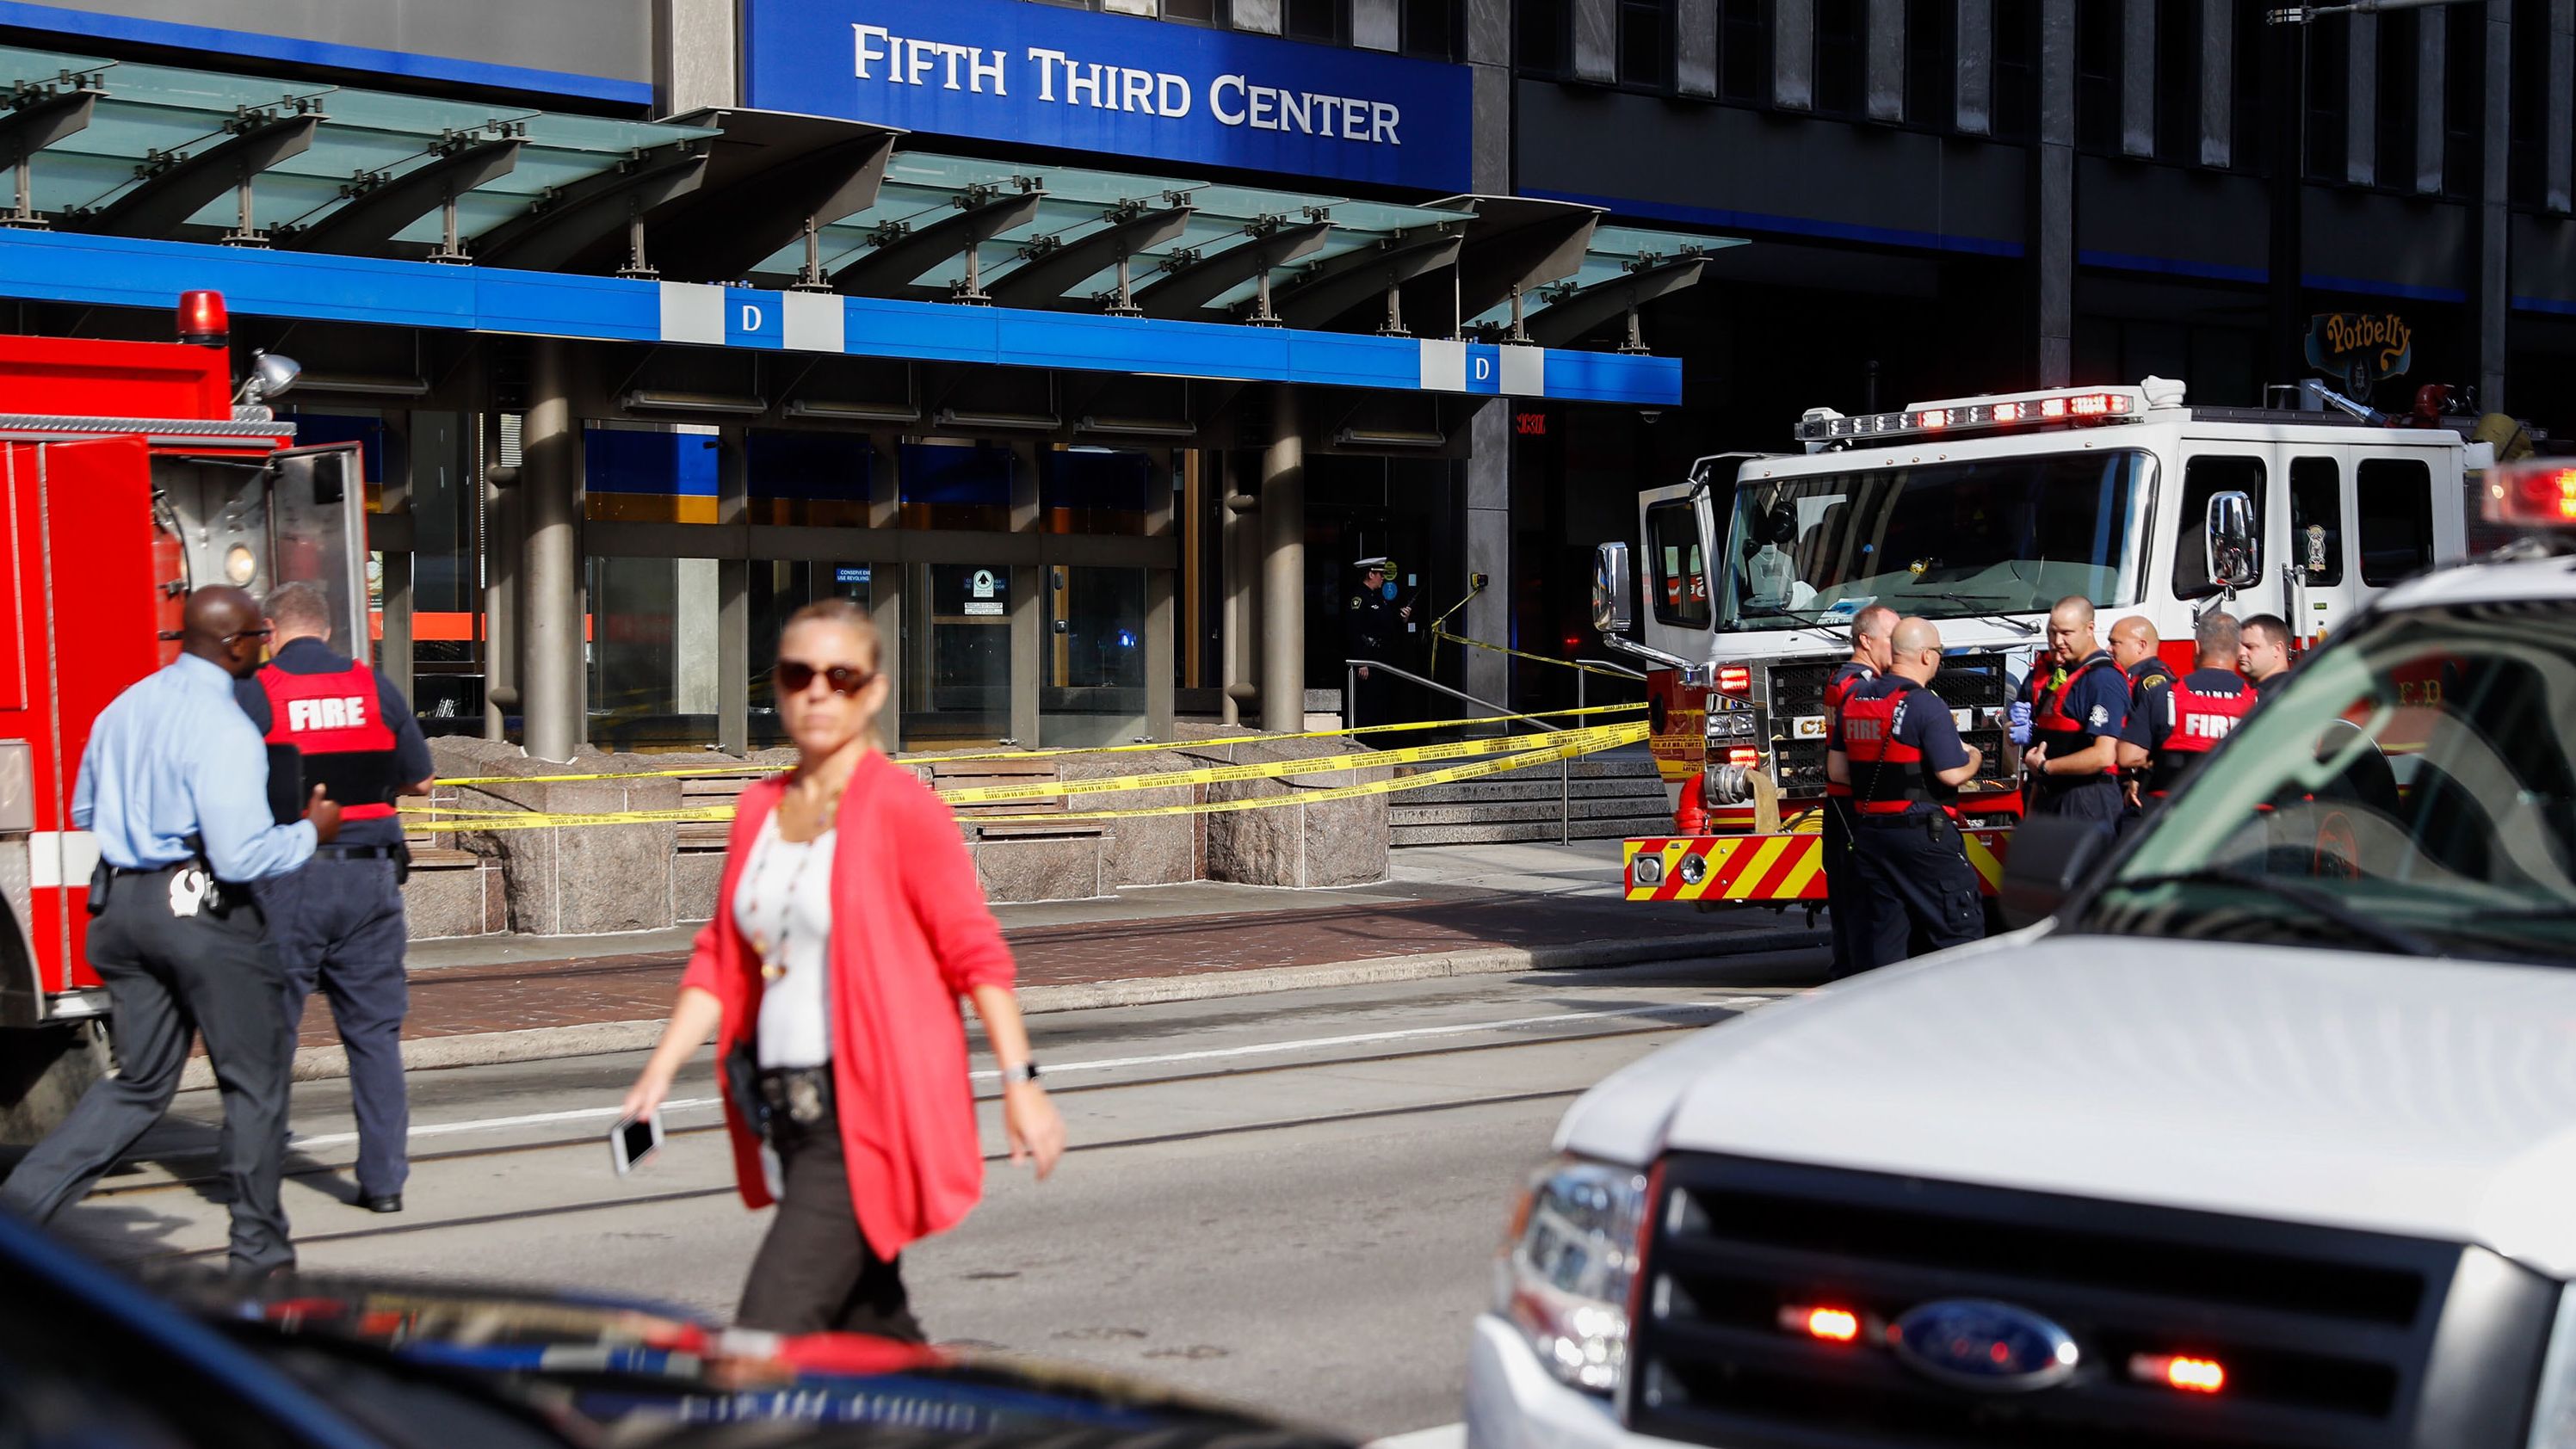 Emergency personnel and police respond to a reported active shooter situation near Fountain Square on Thursday.